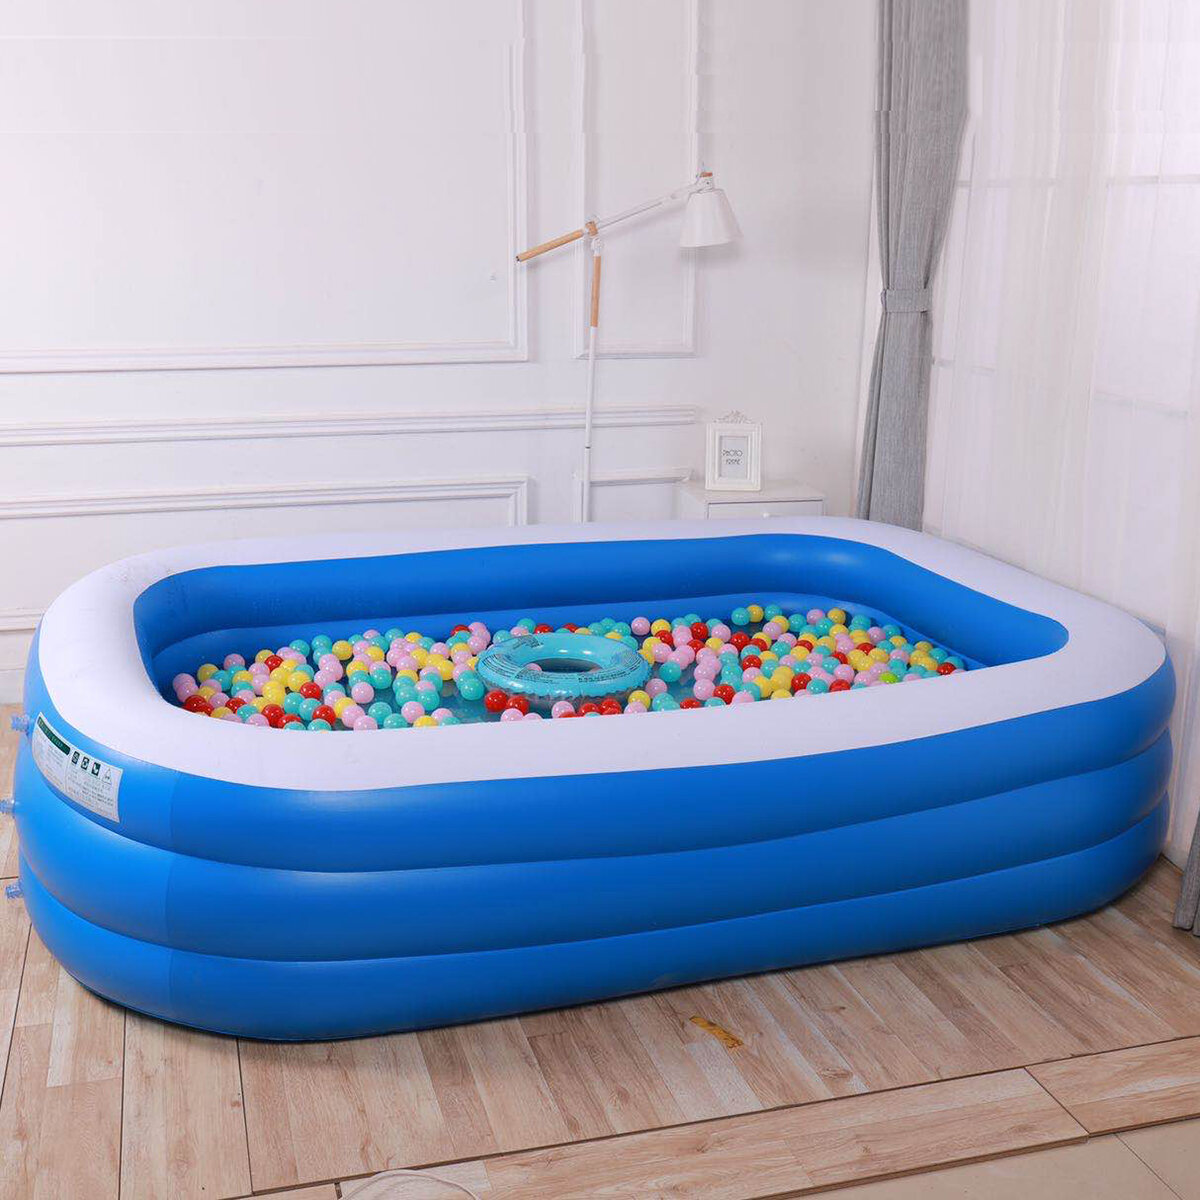 

3-Layer Blue And White Inflatable Foldable Portable Swimming Pool Bathtub for Adult Children Home